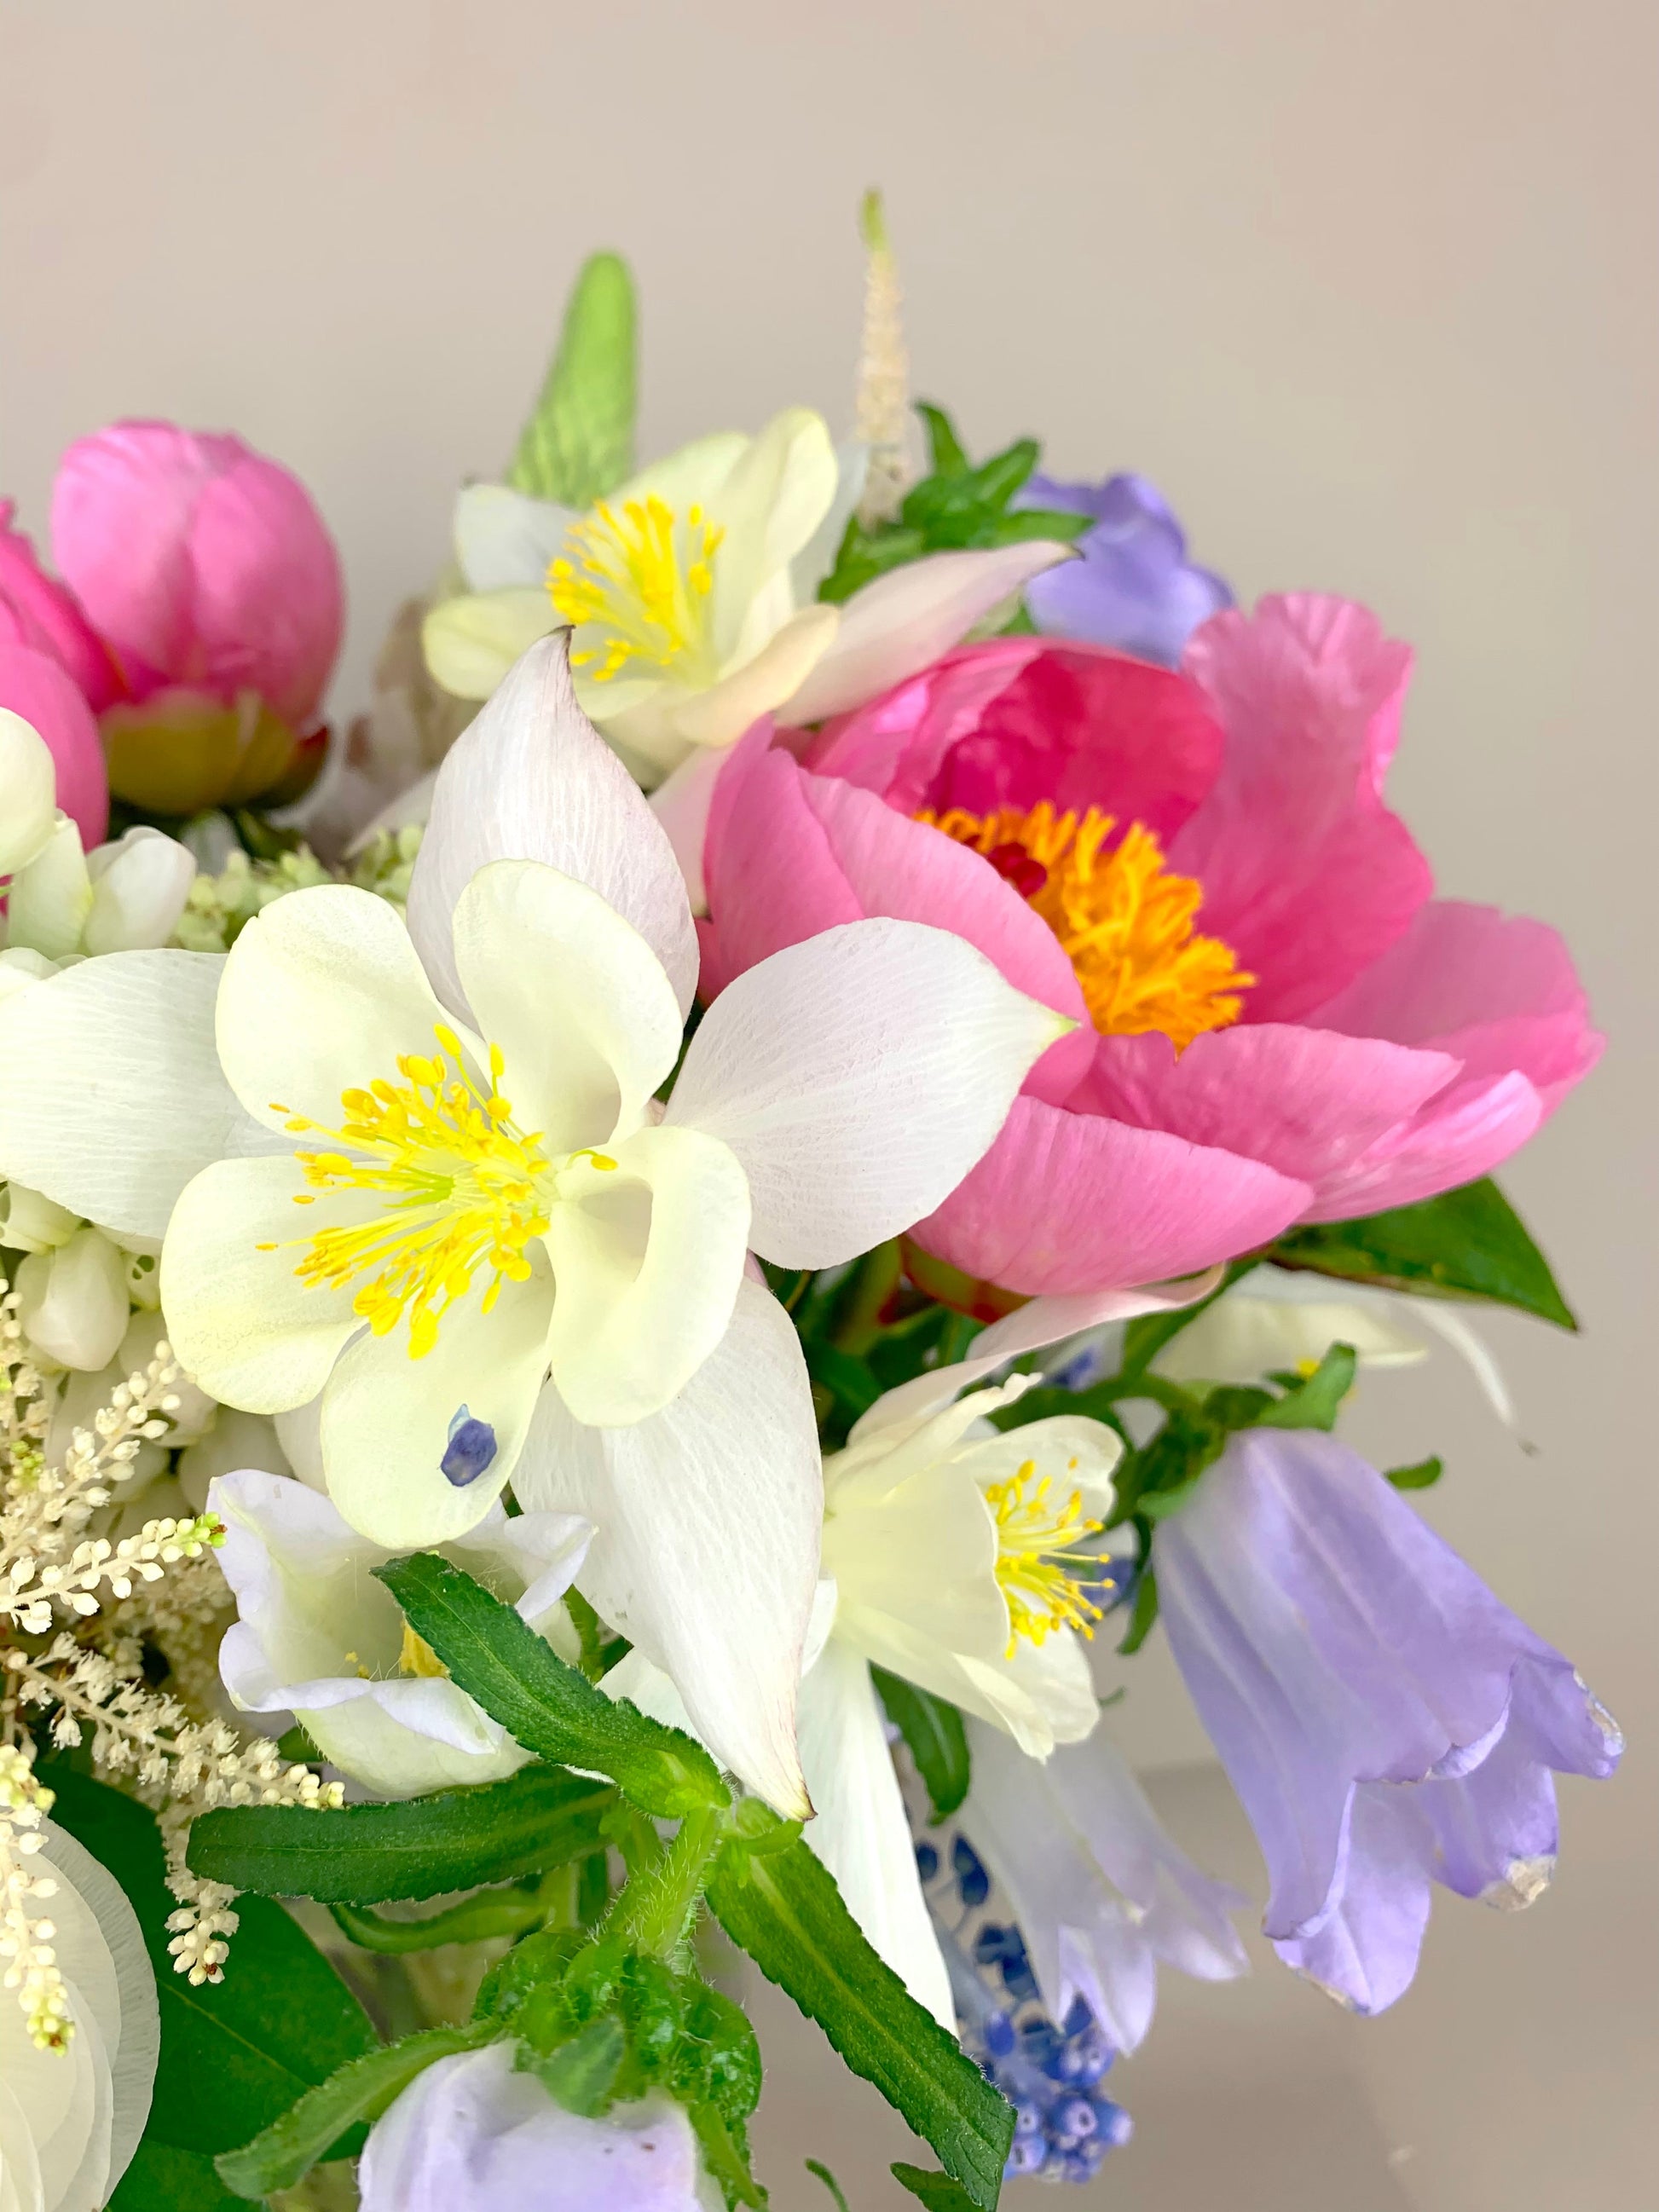 An arrangement of COLORFUL flowers in a vase on a table.